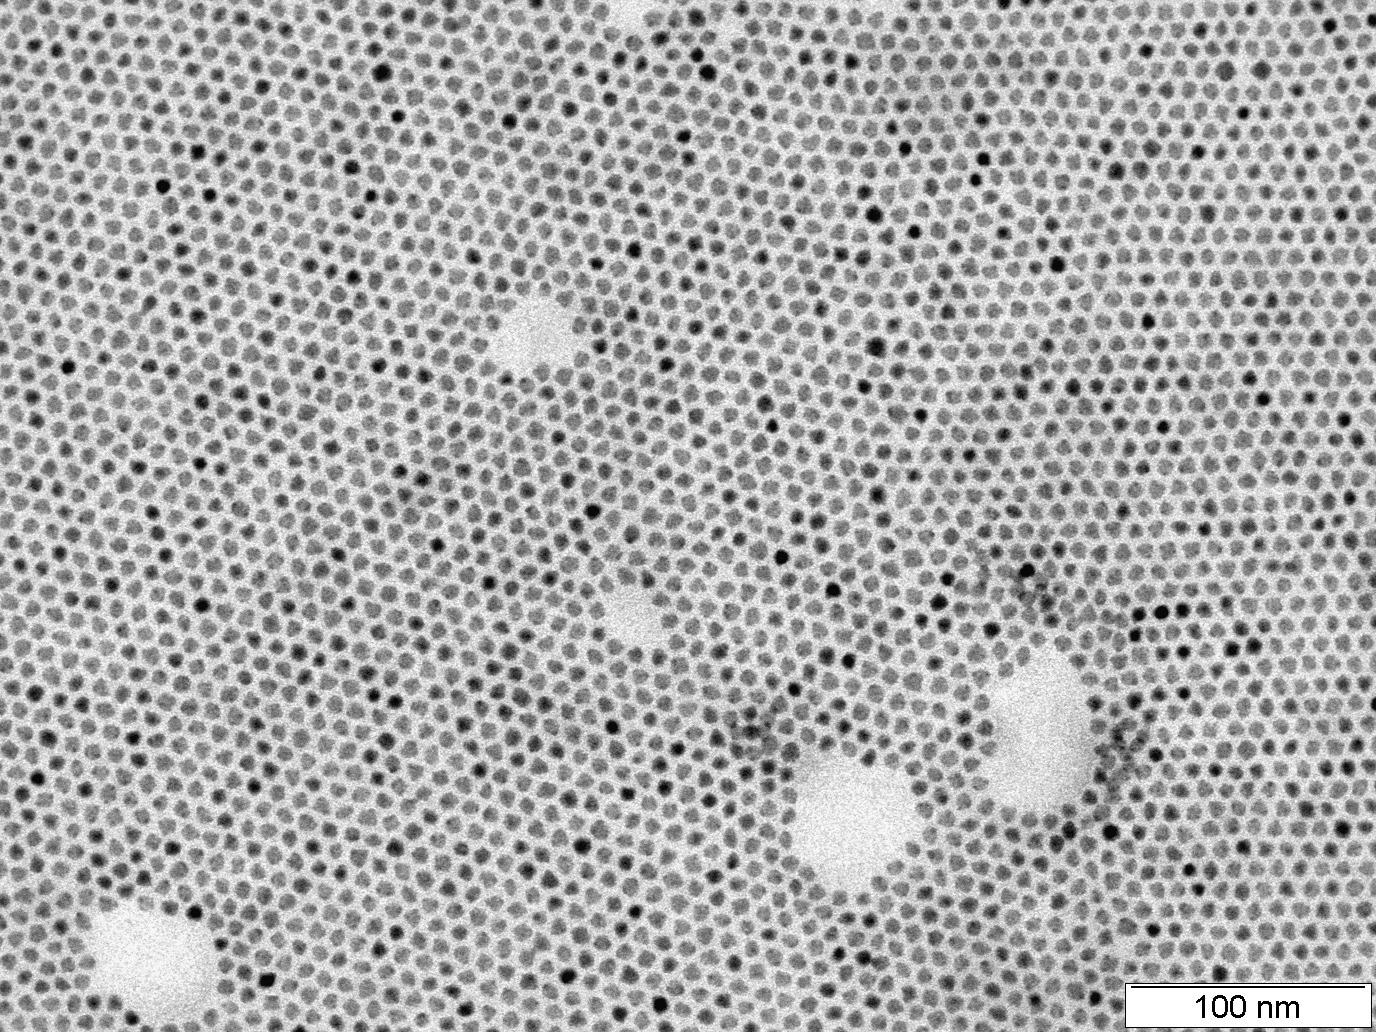 New Study Shows Self-Organizing Properties of Lead Sulfide Particles